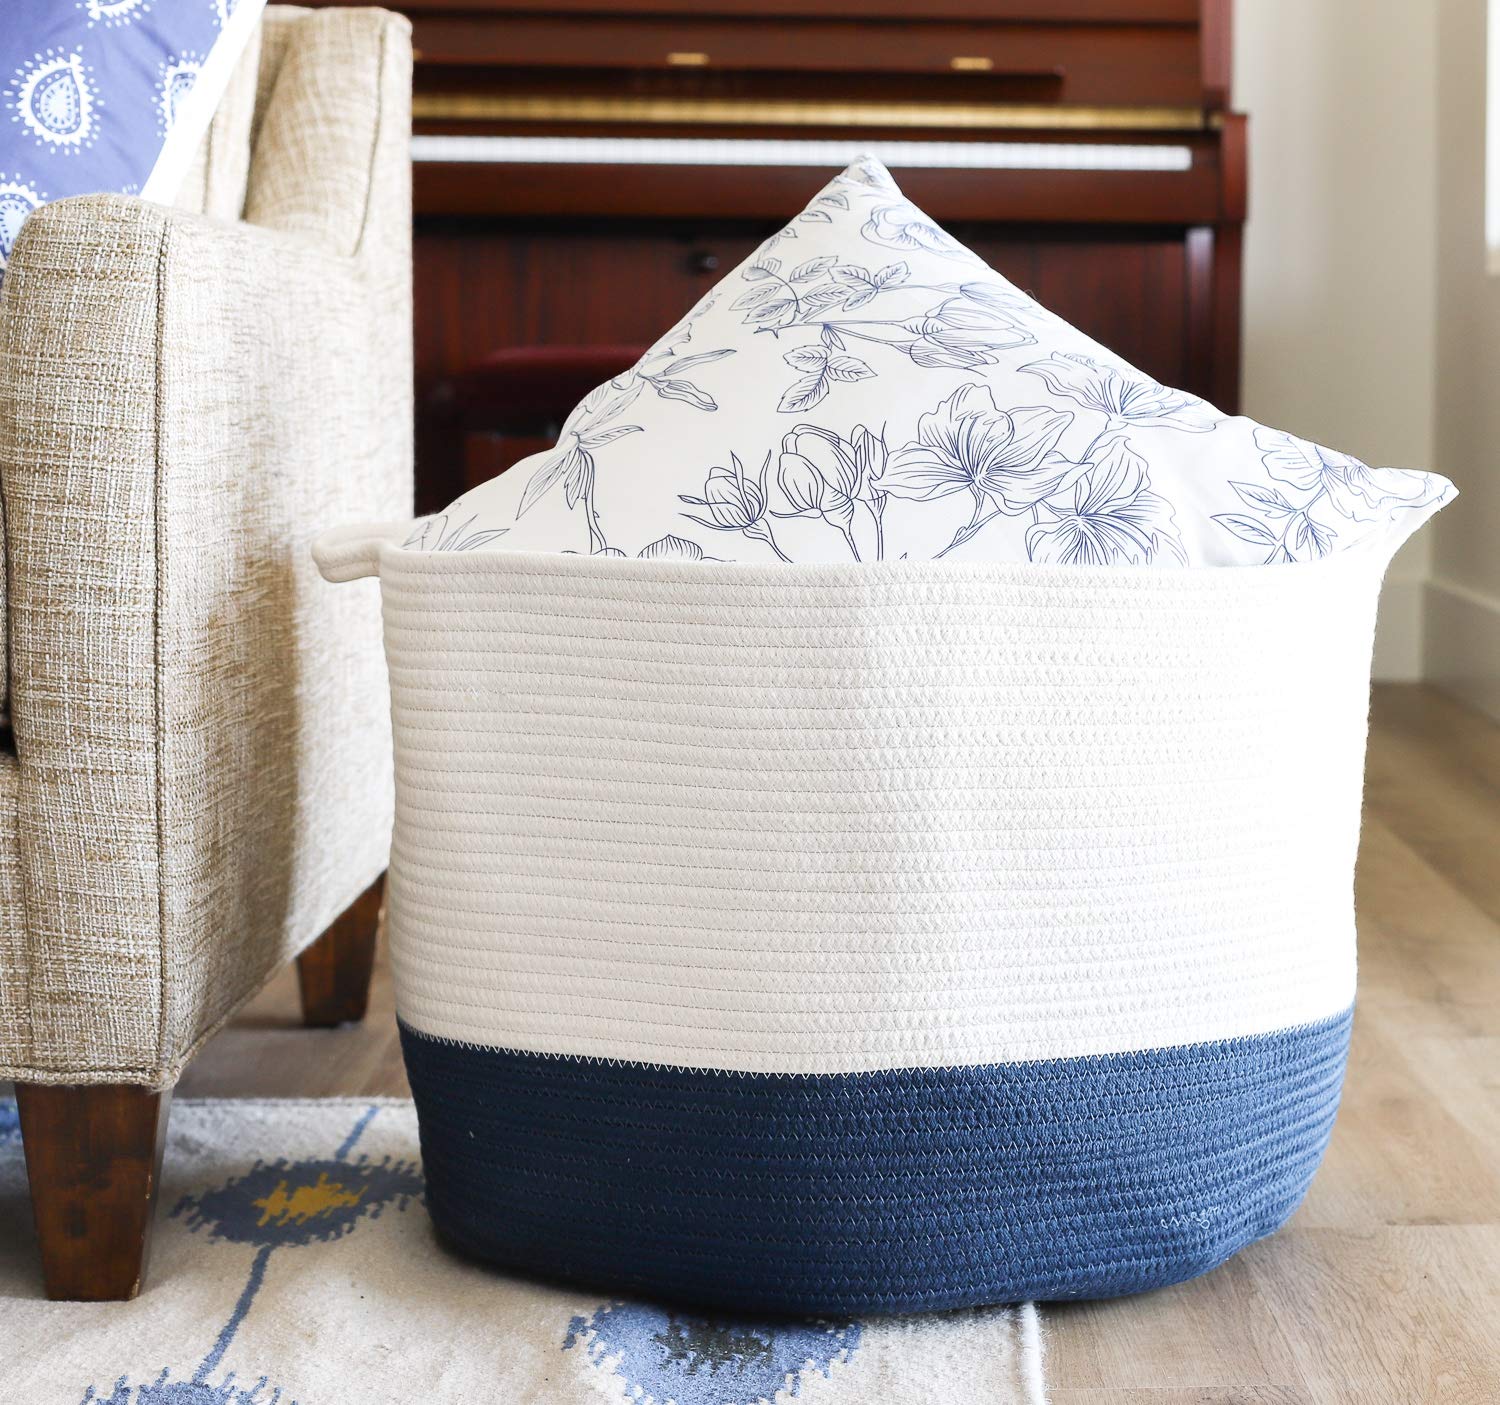 Chloe and Cotton XXXL Extra Large Woven Rope Basket with Handles for Storage - 15" H x 21.5" D - Navy White - image 3 of 5